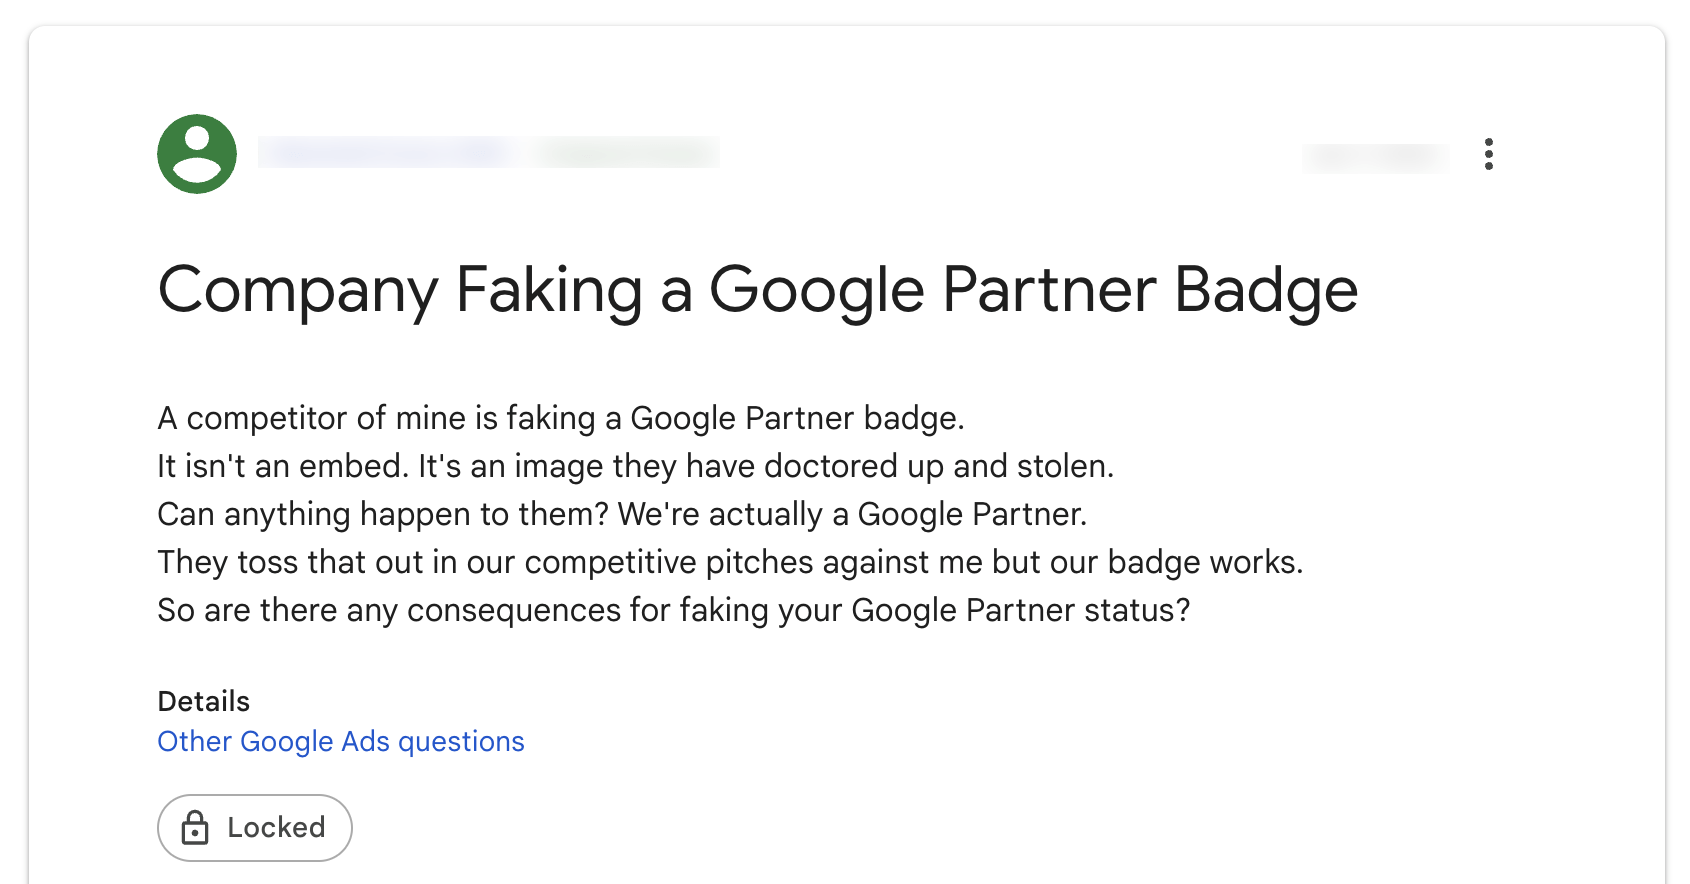 Complaint about a company faking Google Partner badge, via Google Support